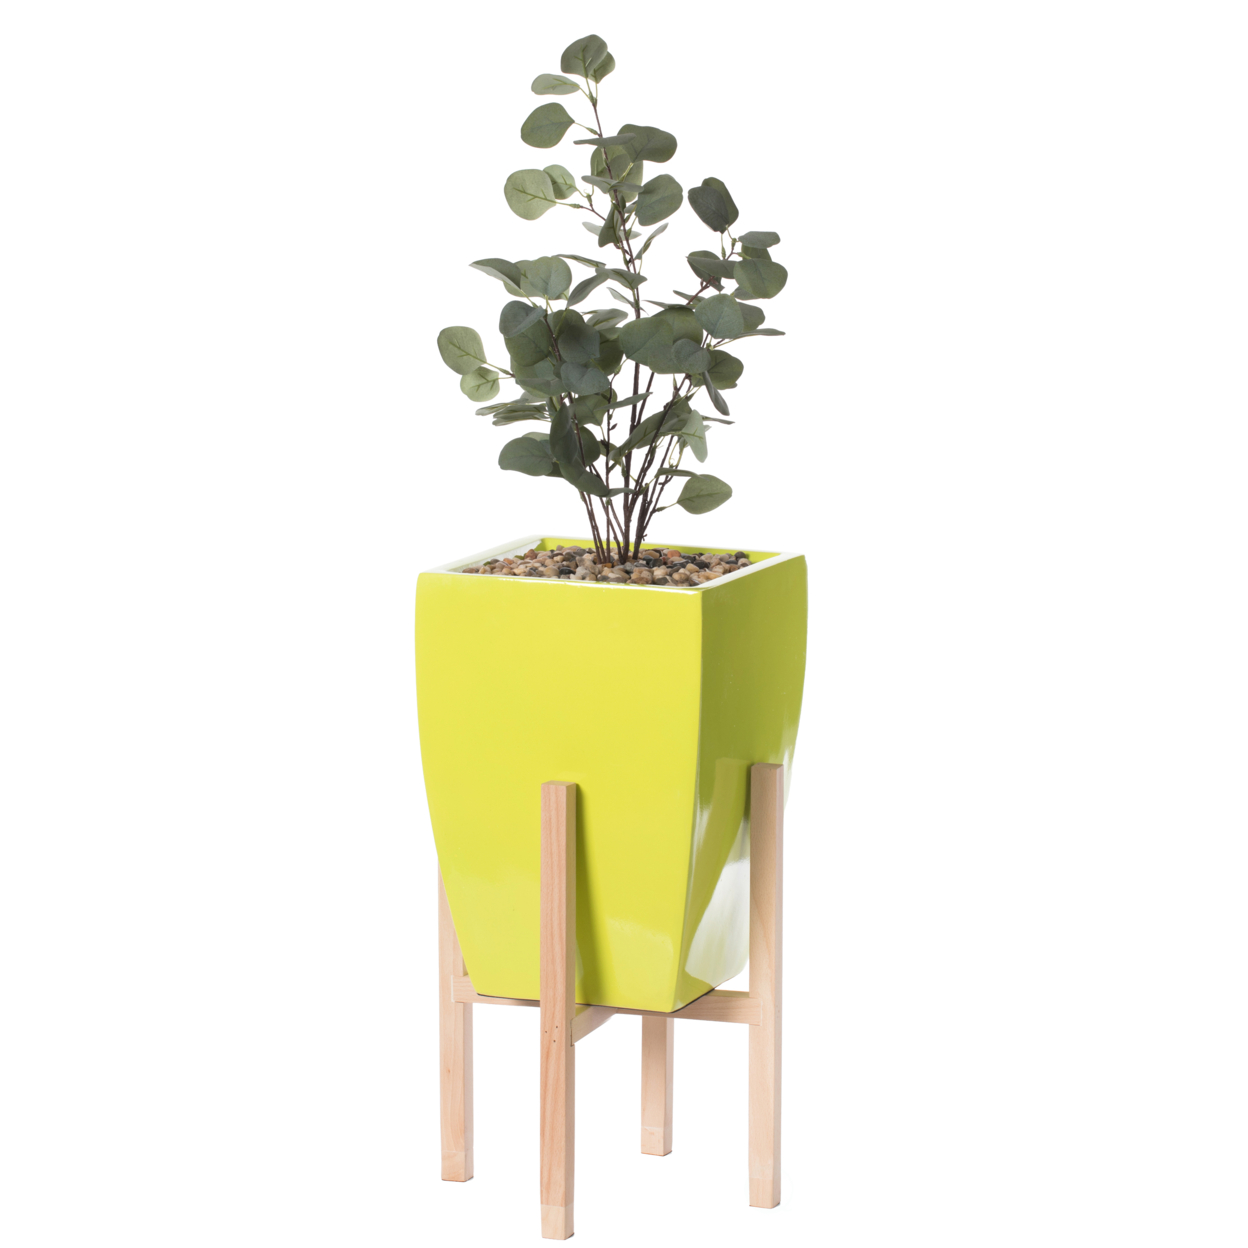 Indoor Decorative Square Planter With Wooden Stand - White